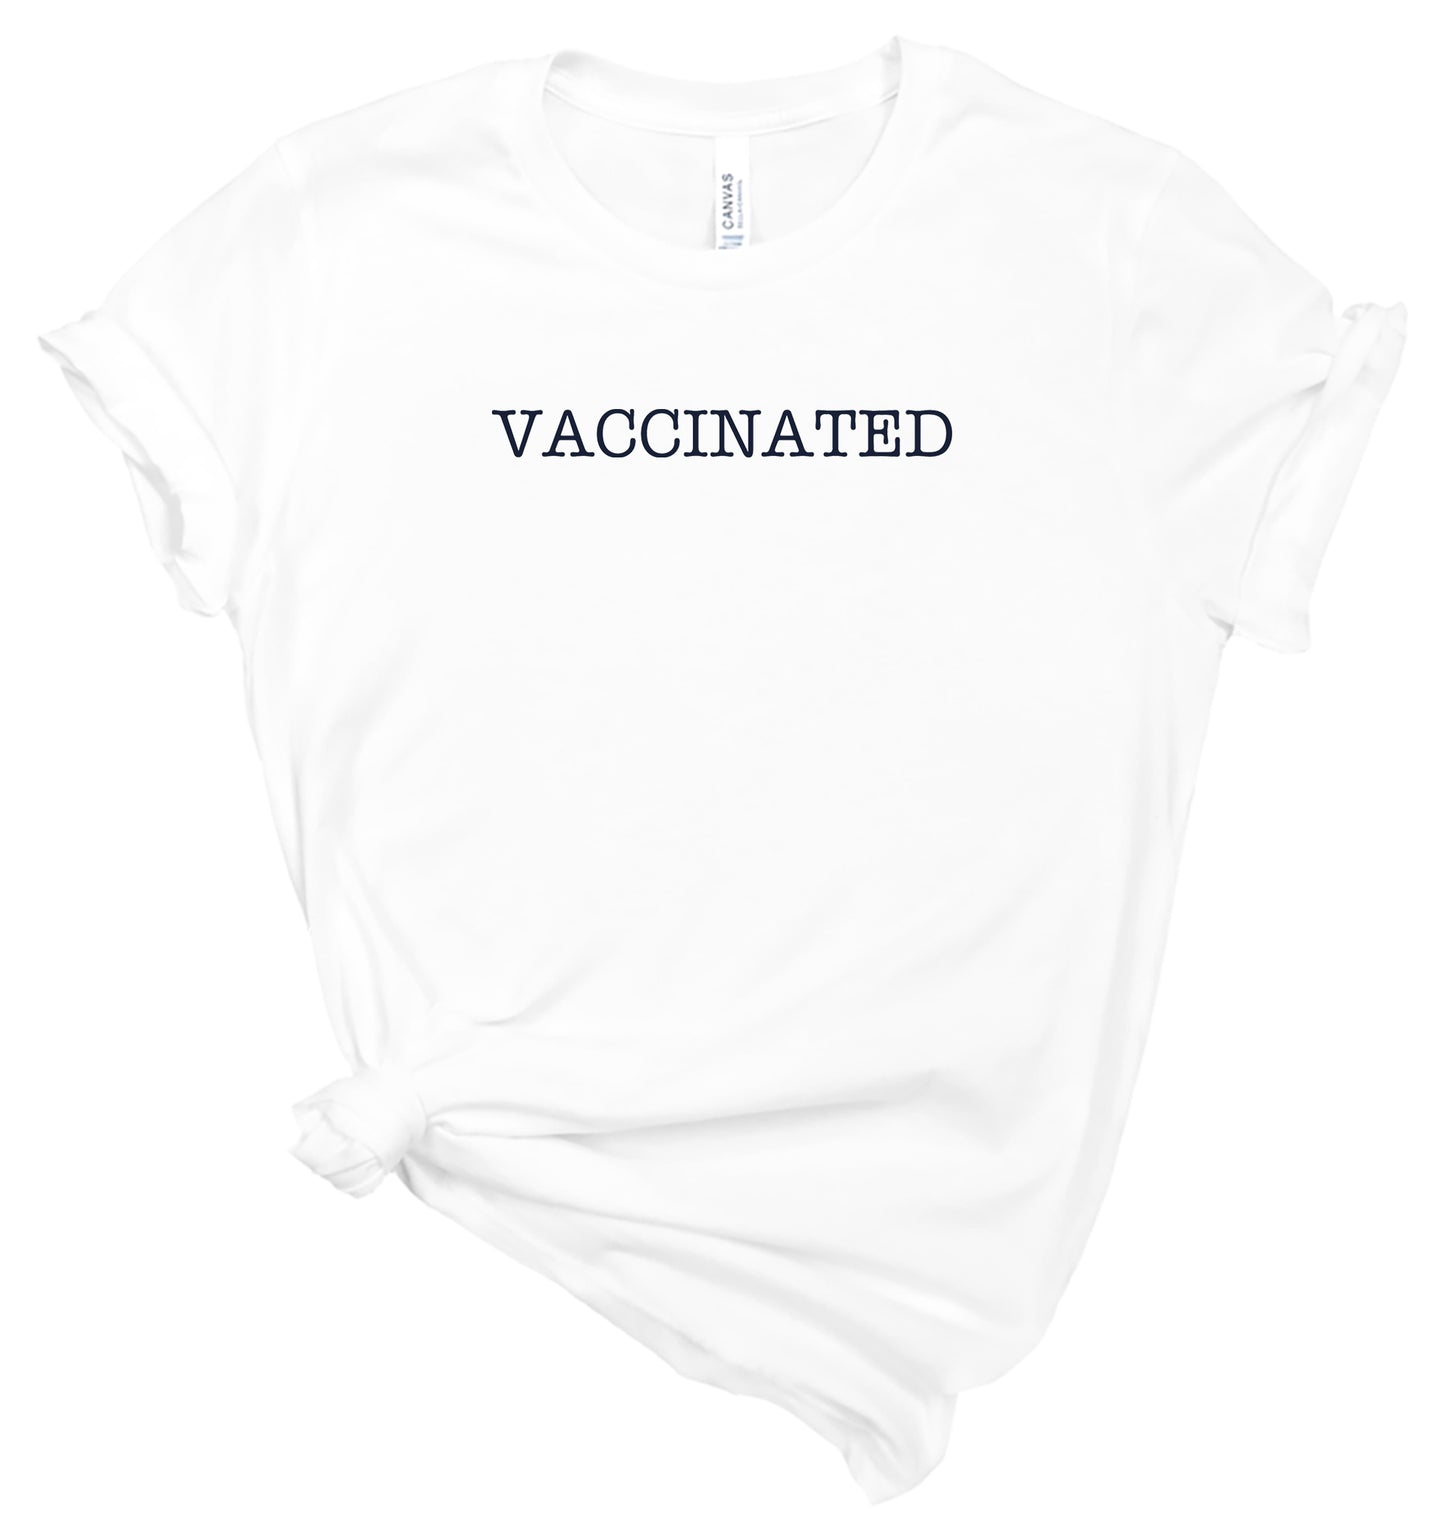 Vaccinated - T-Shirt